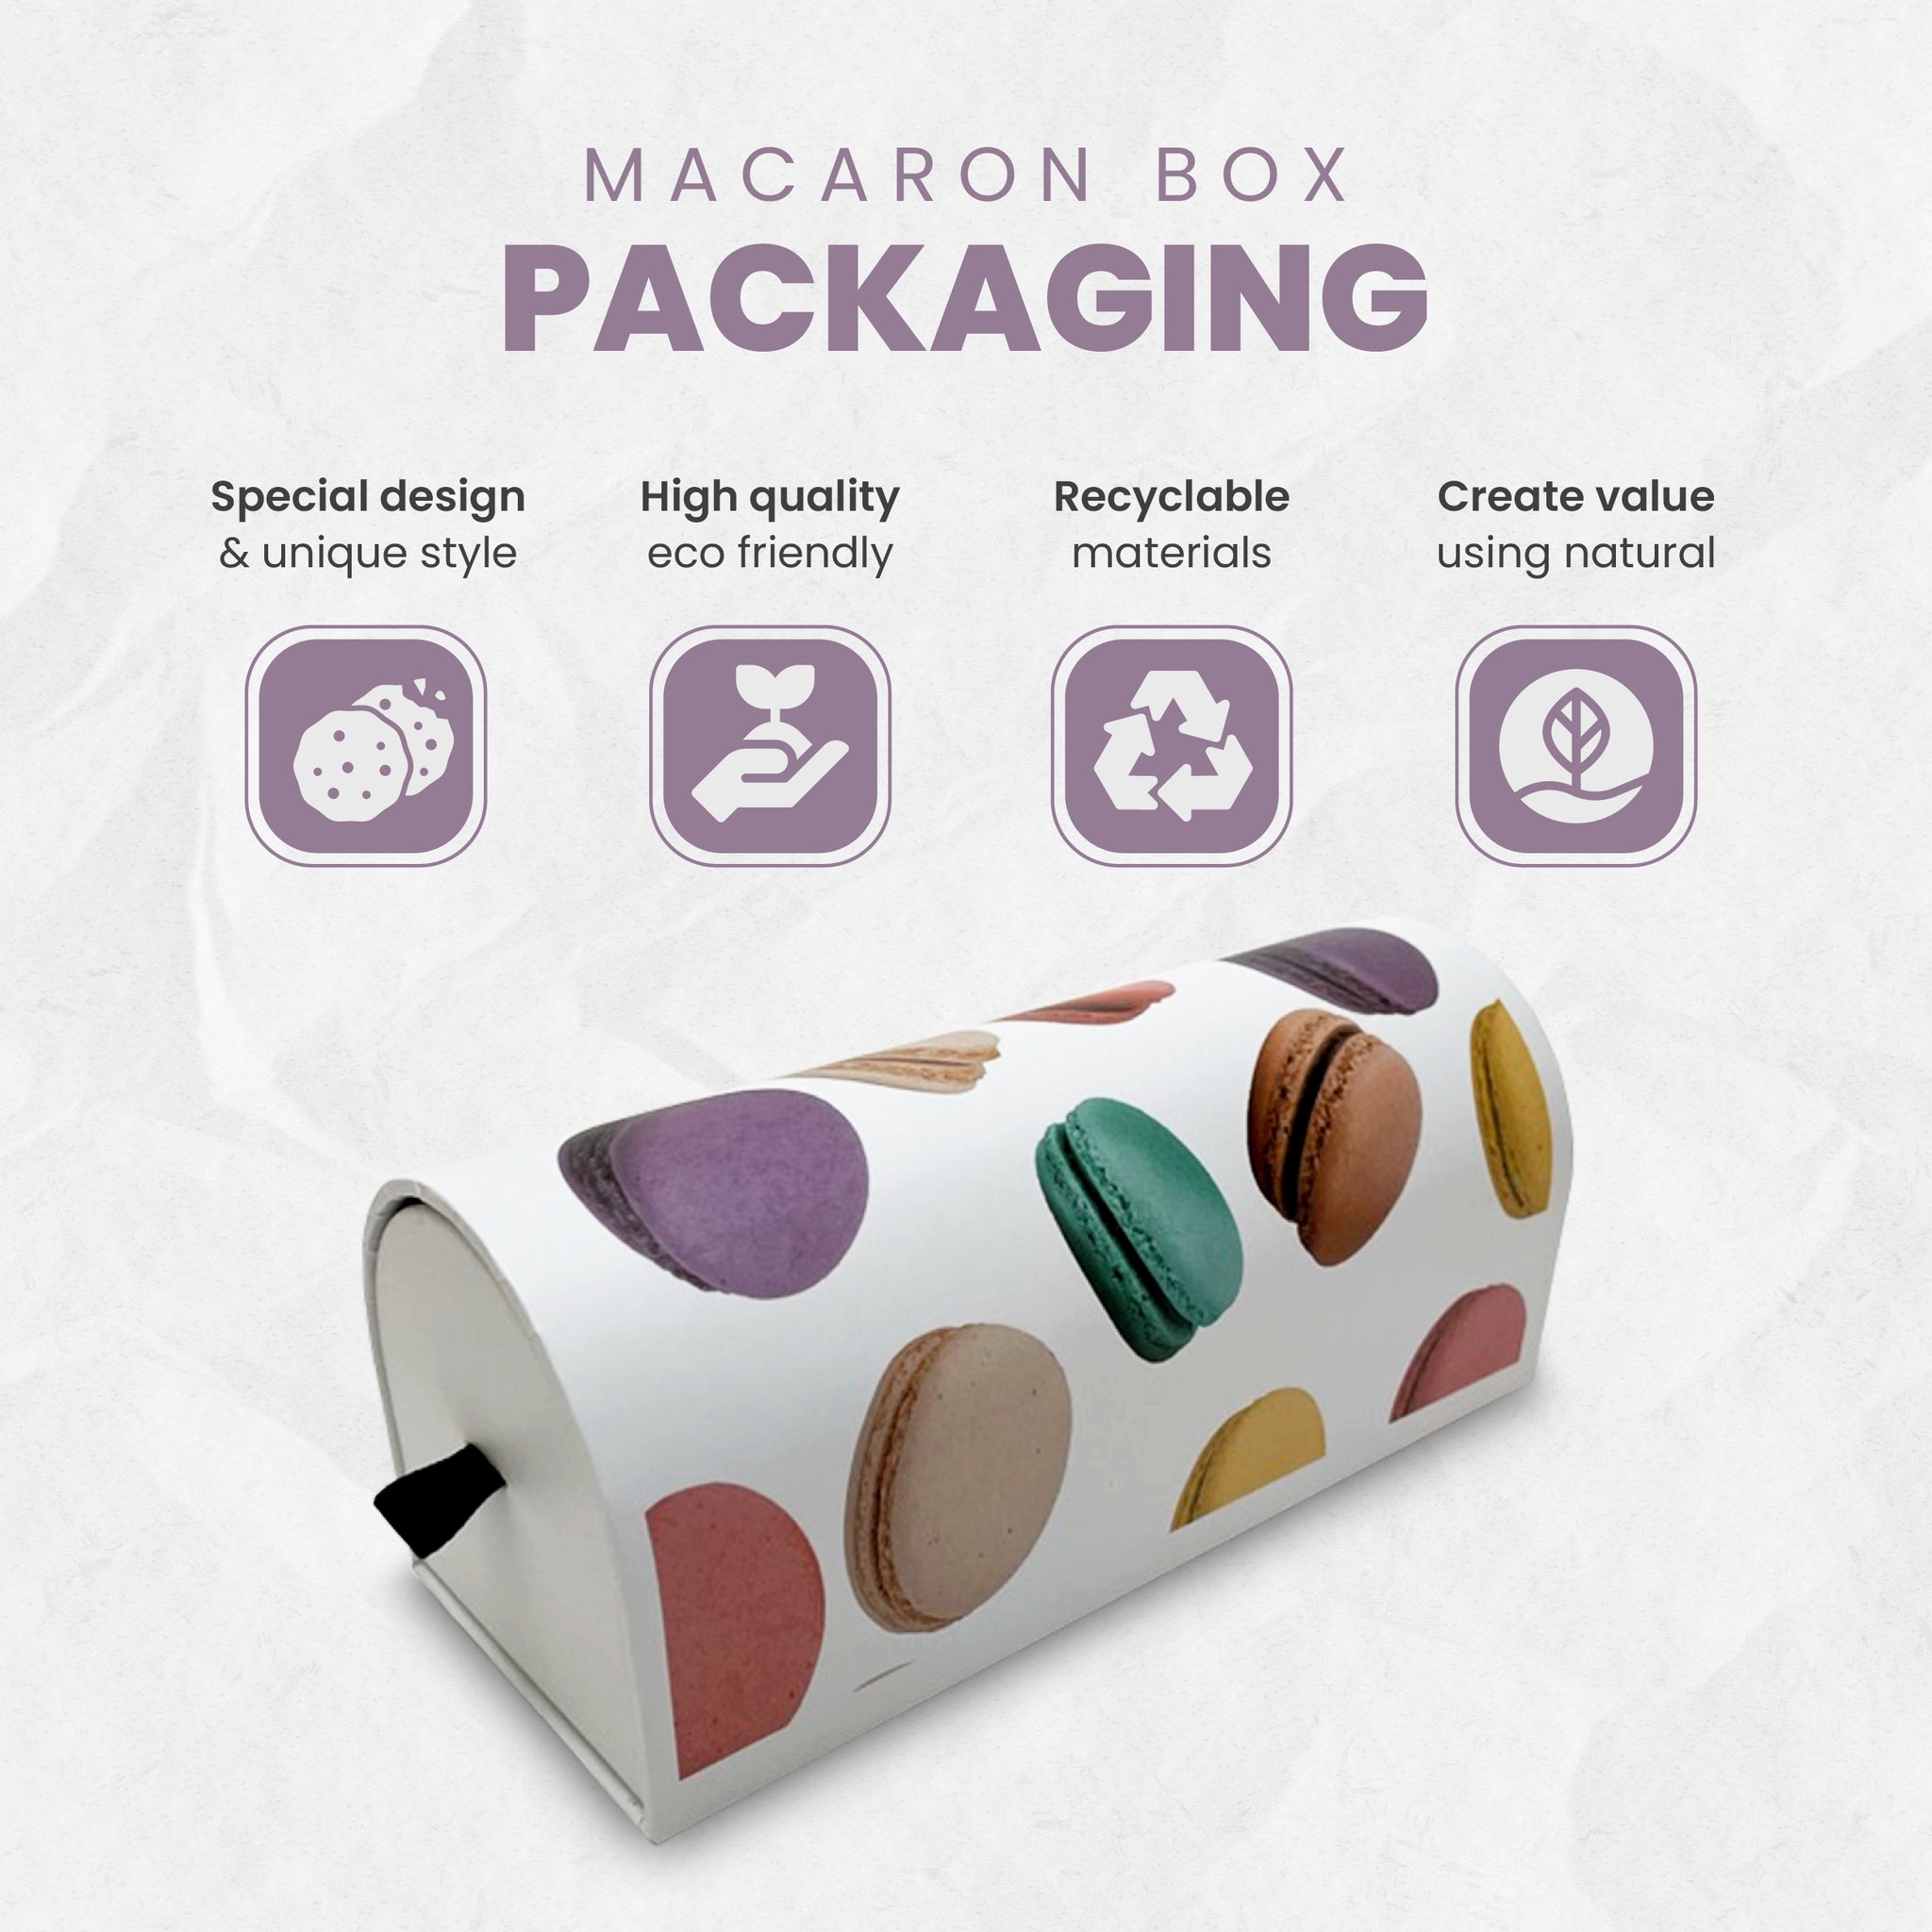 Luxury Macaron Box for Special Events with a Print, Holds 5 Macarons